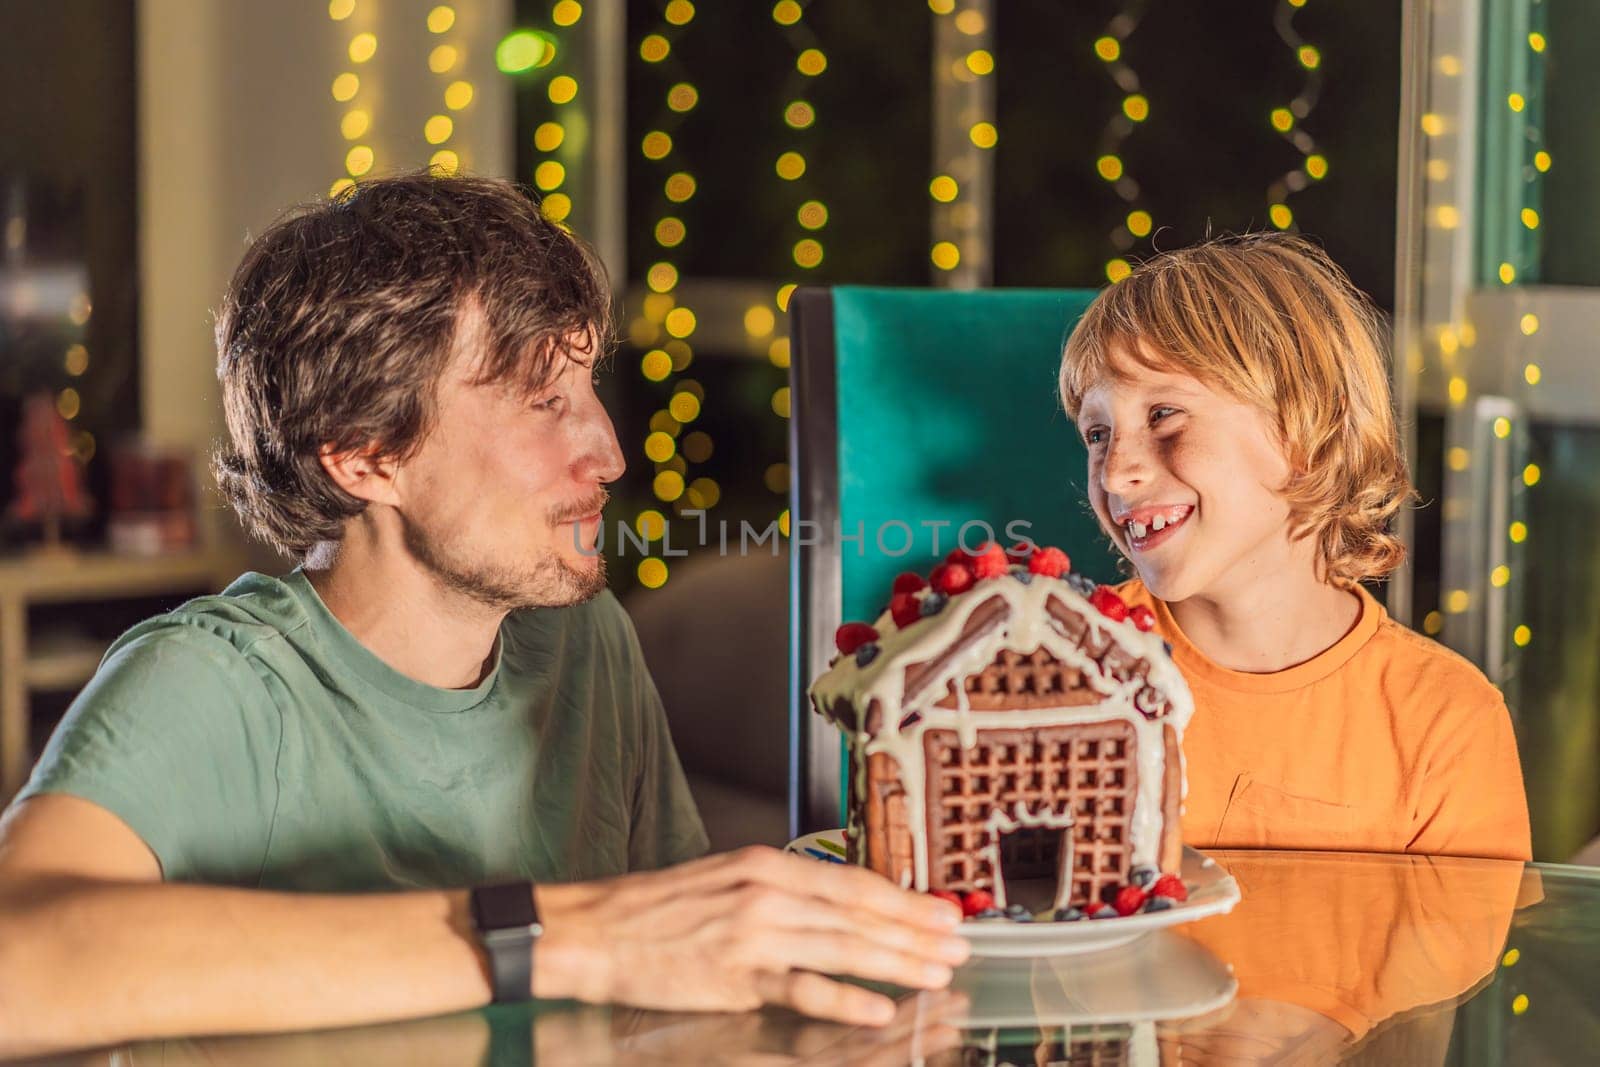 Savor unique moments as dad and son bite into an unconventional gingerbread house, adding a twist to Christmas traditions. A tasty blend of creativity and family joy.